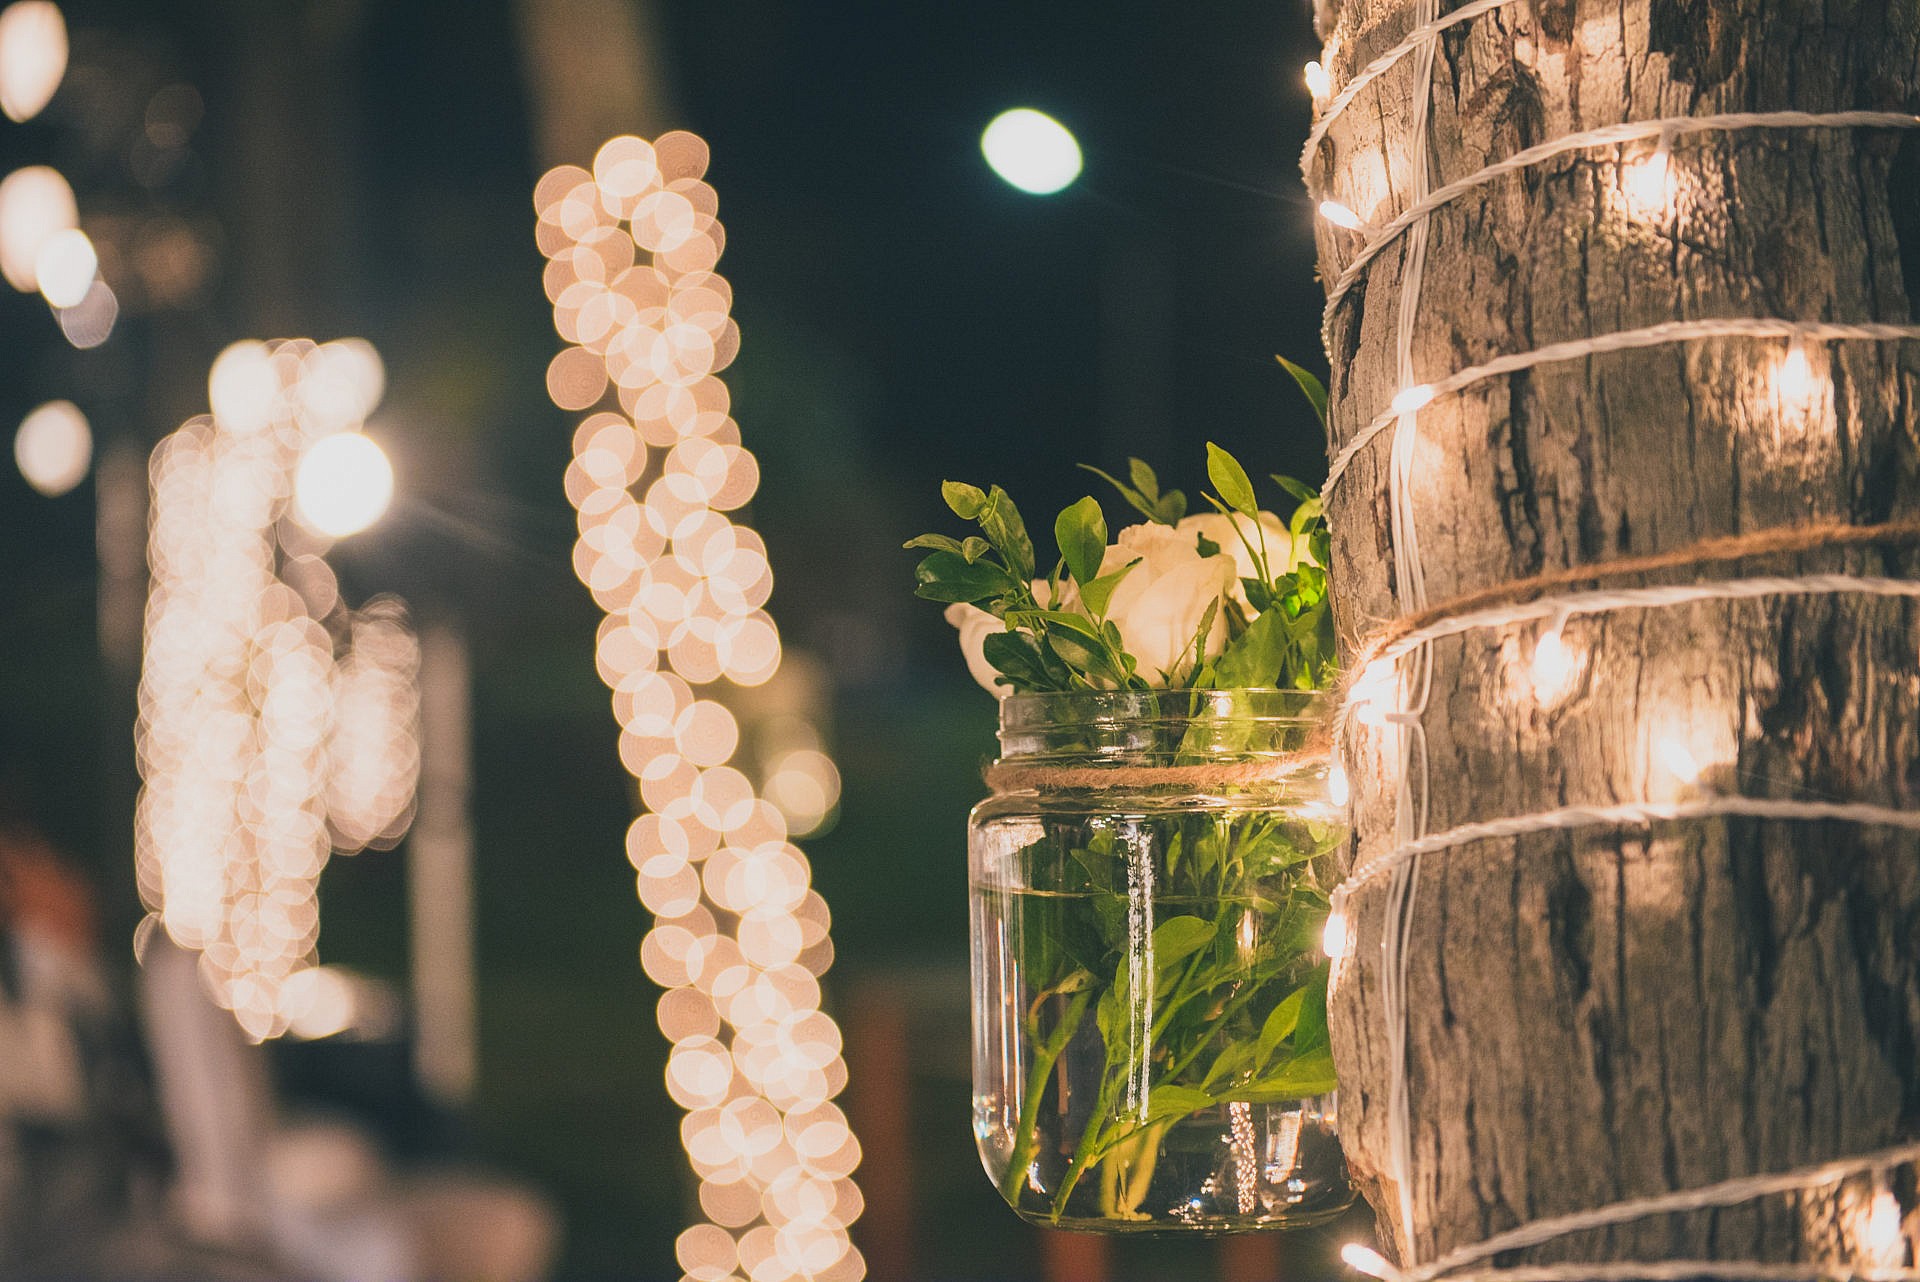 Warm delicate lights are the perfect wedding decor additions